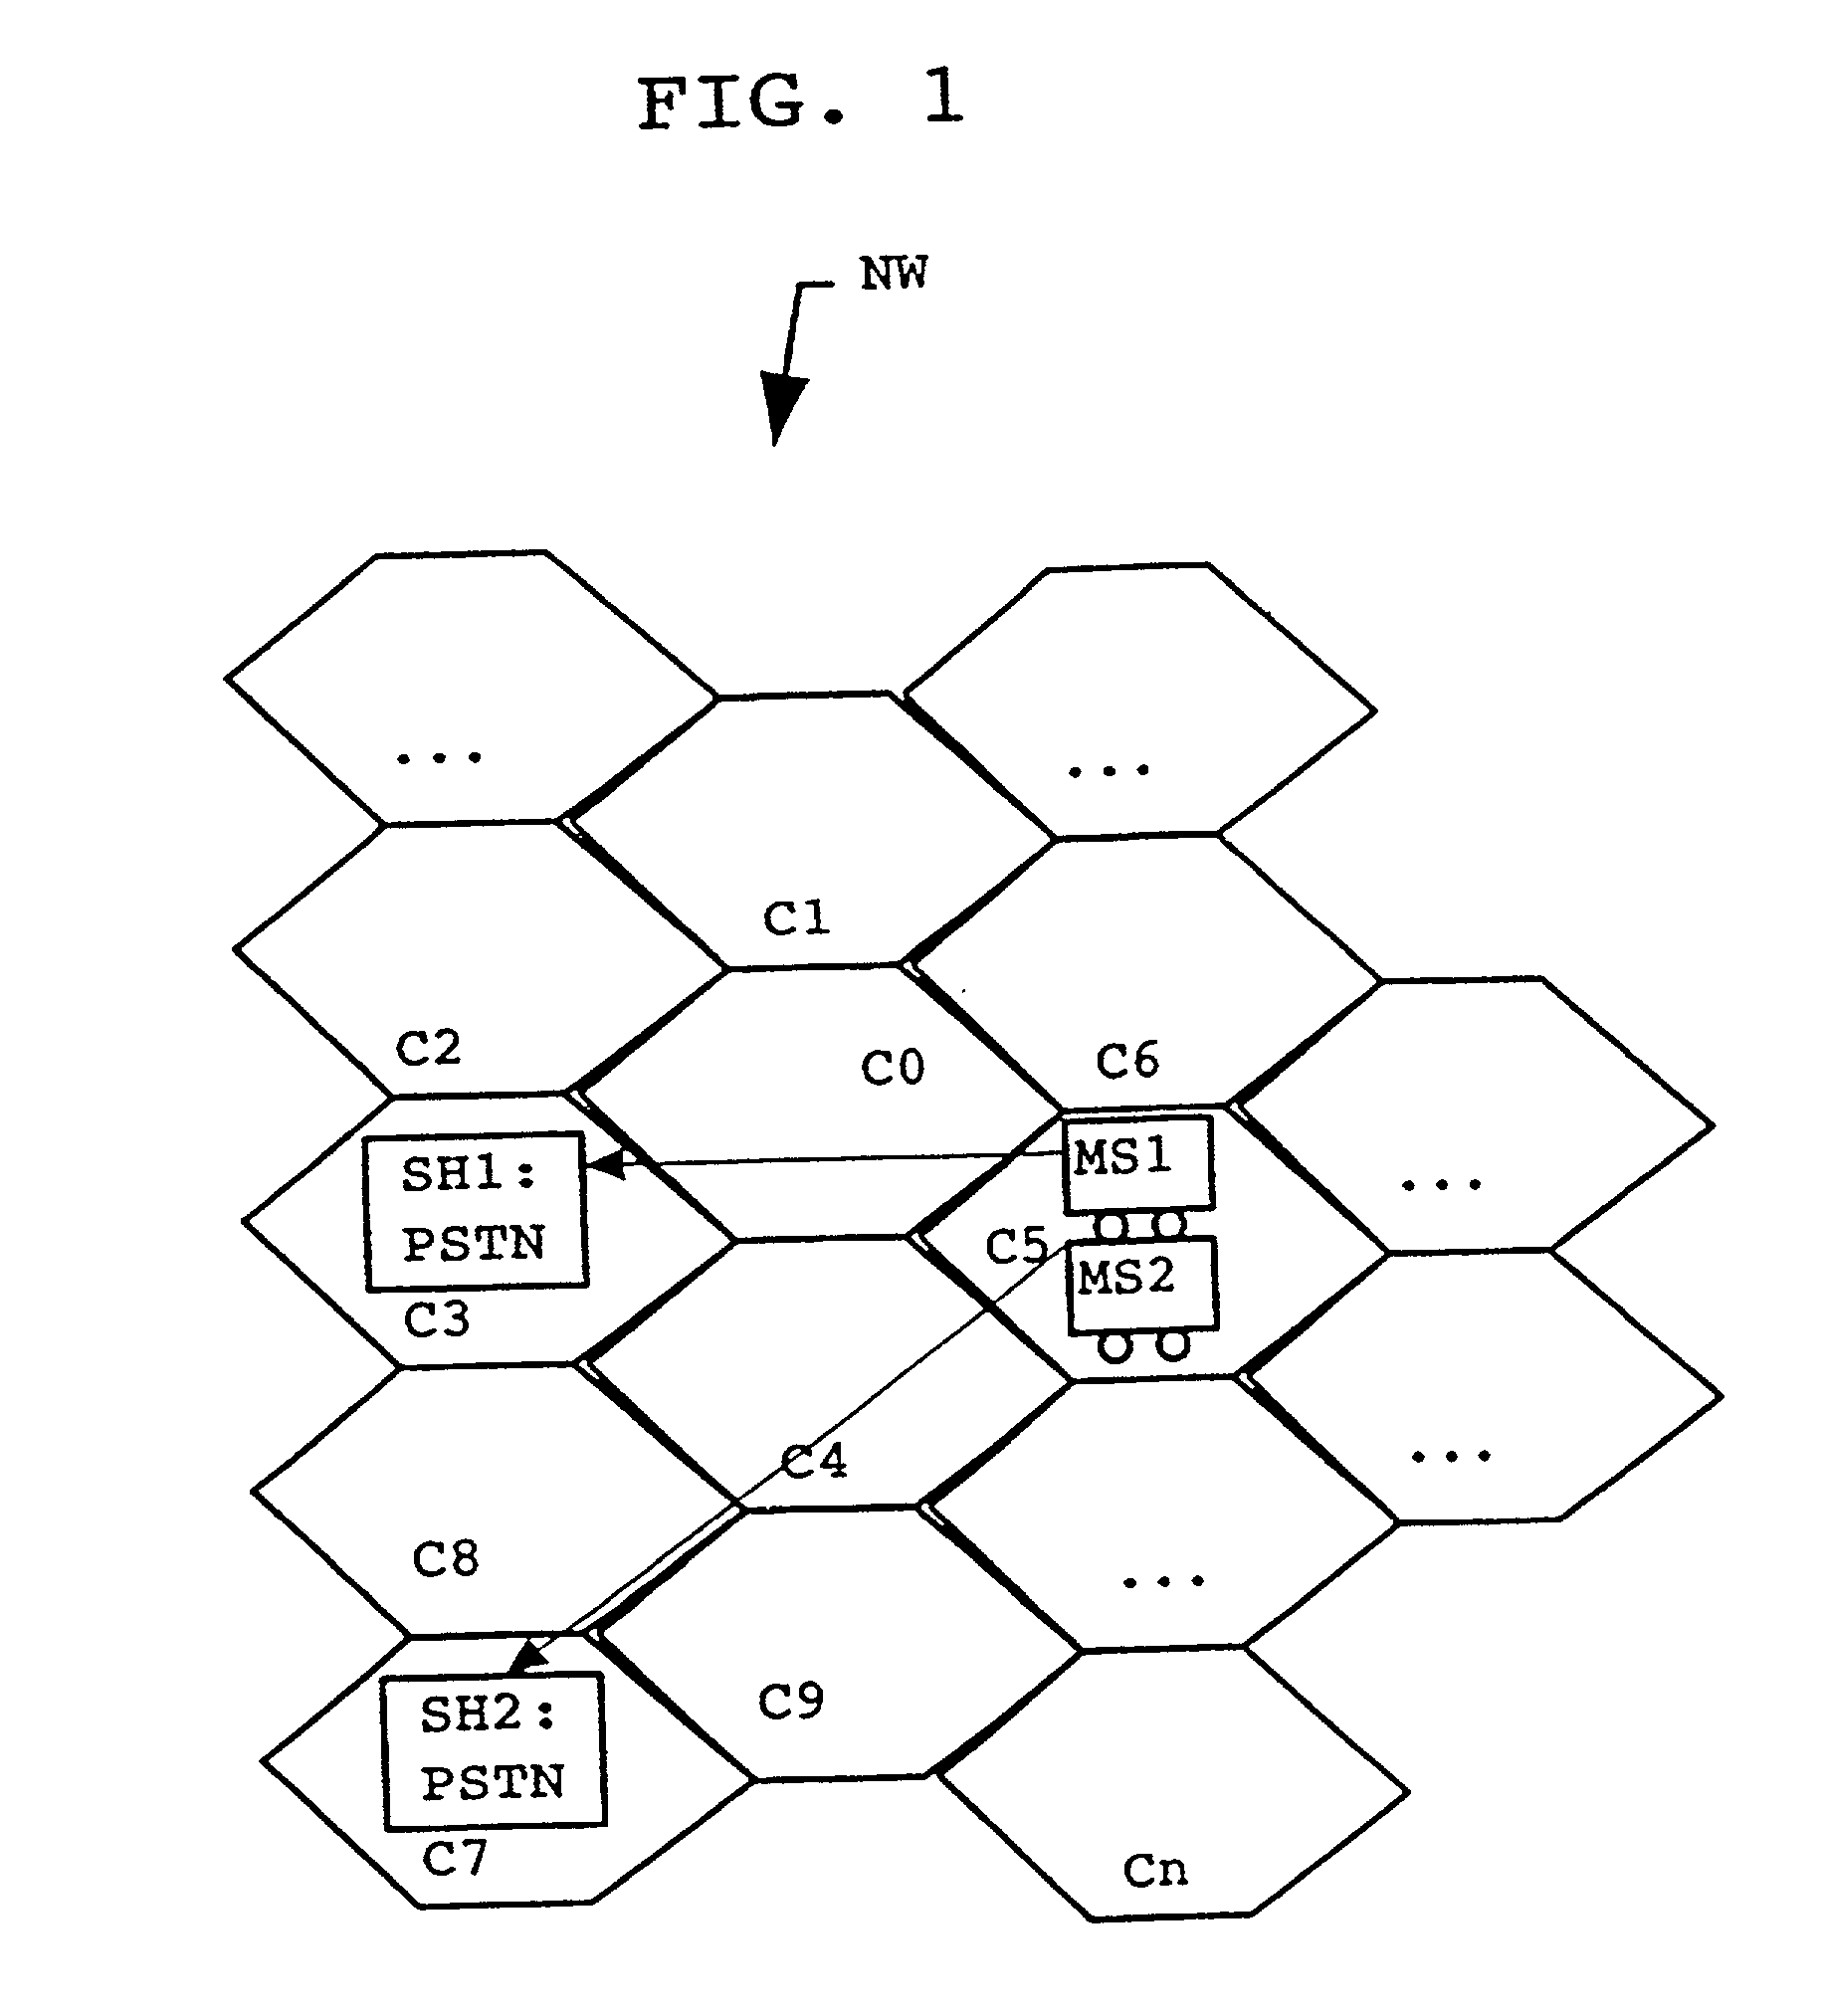 Method for generation and transmission of messages in a mobile telecommunication network